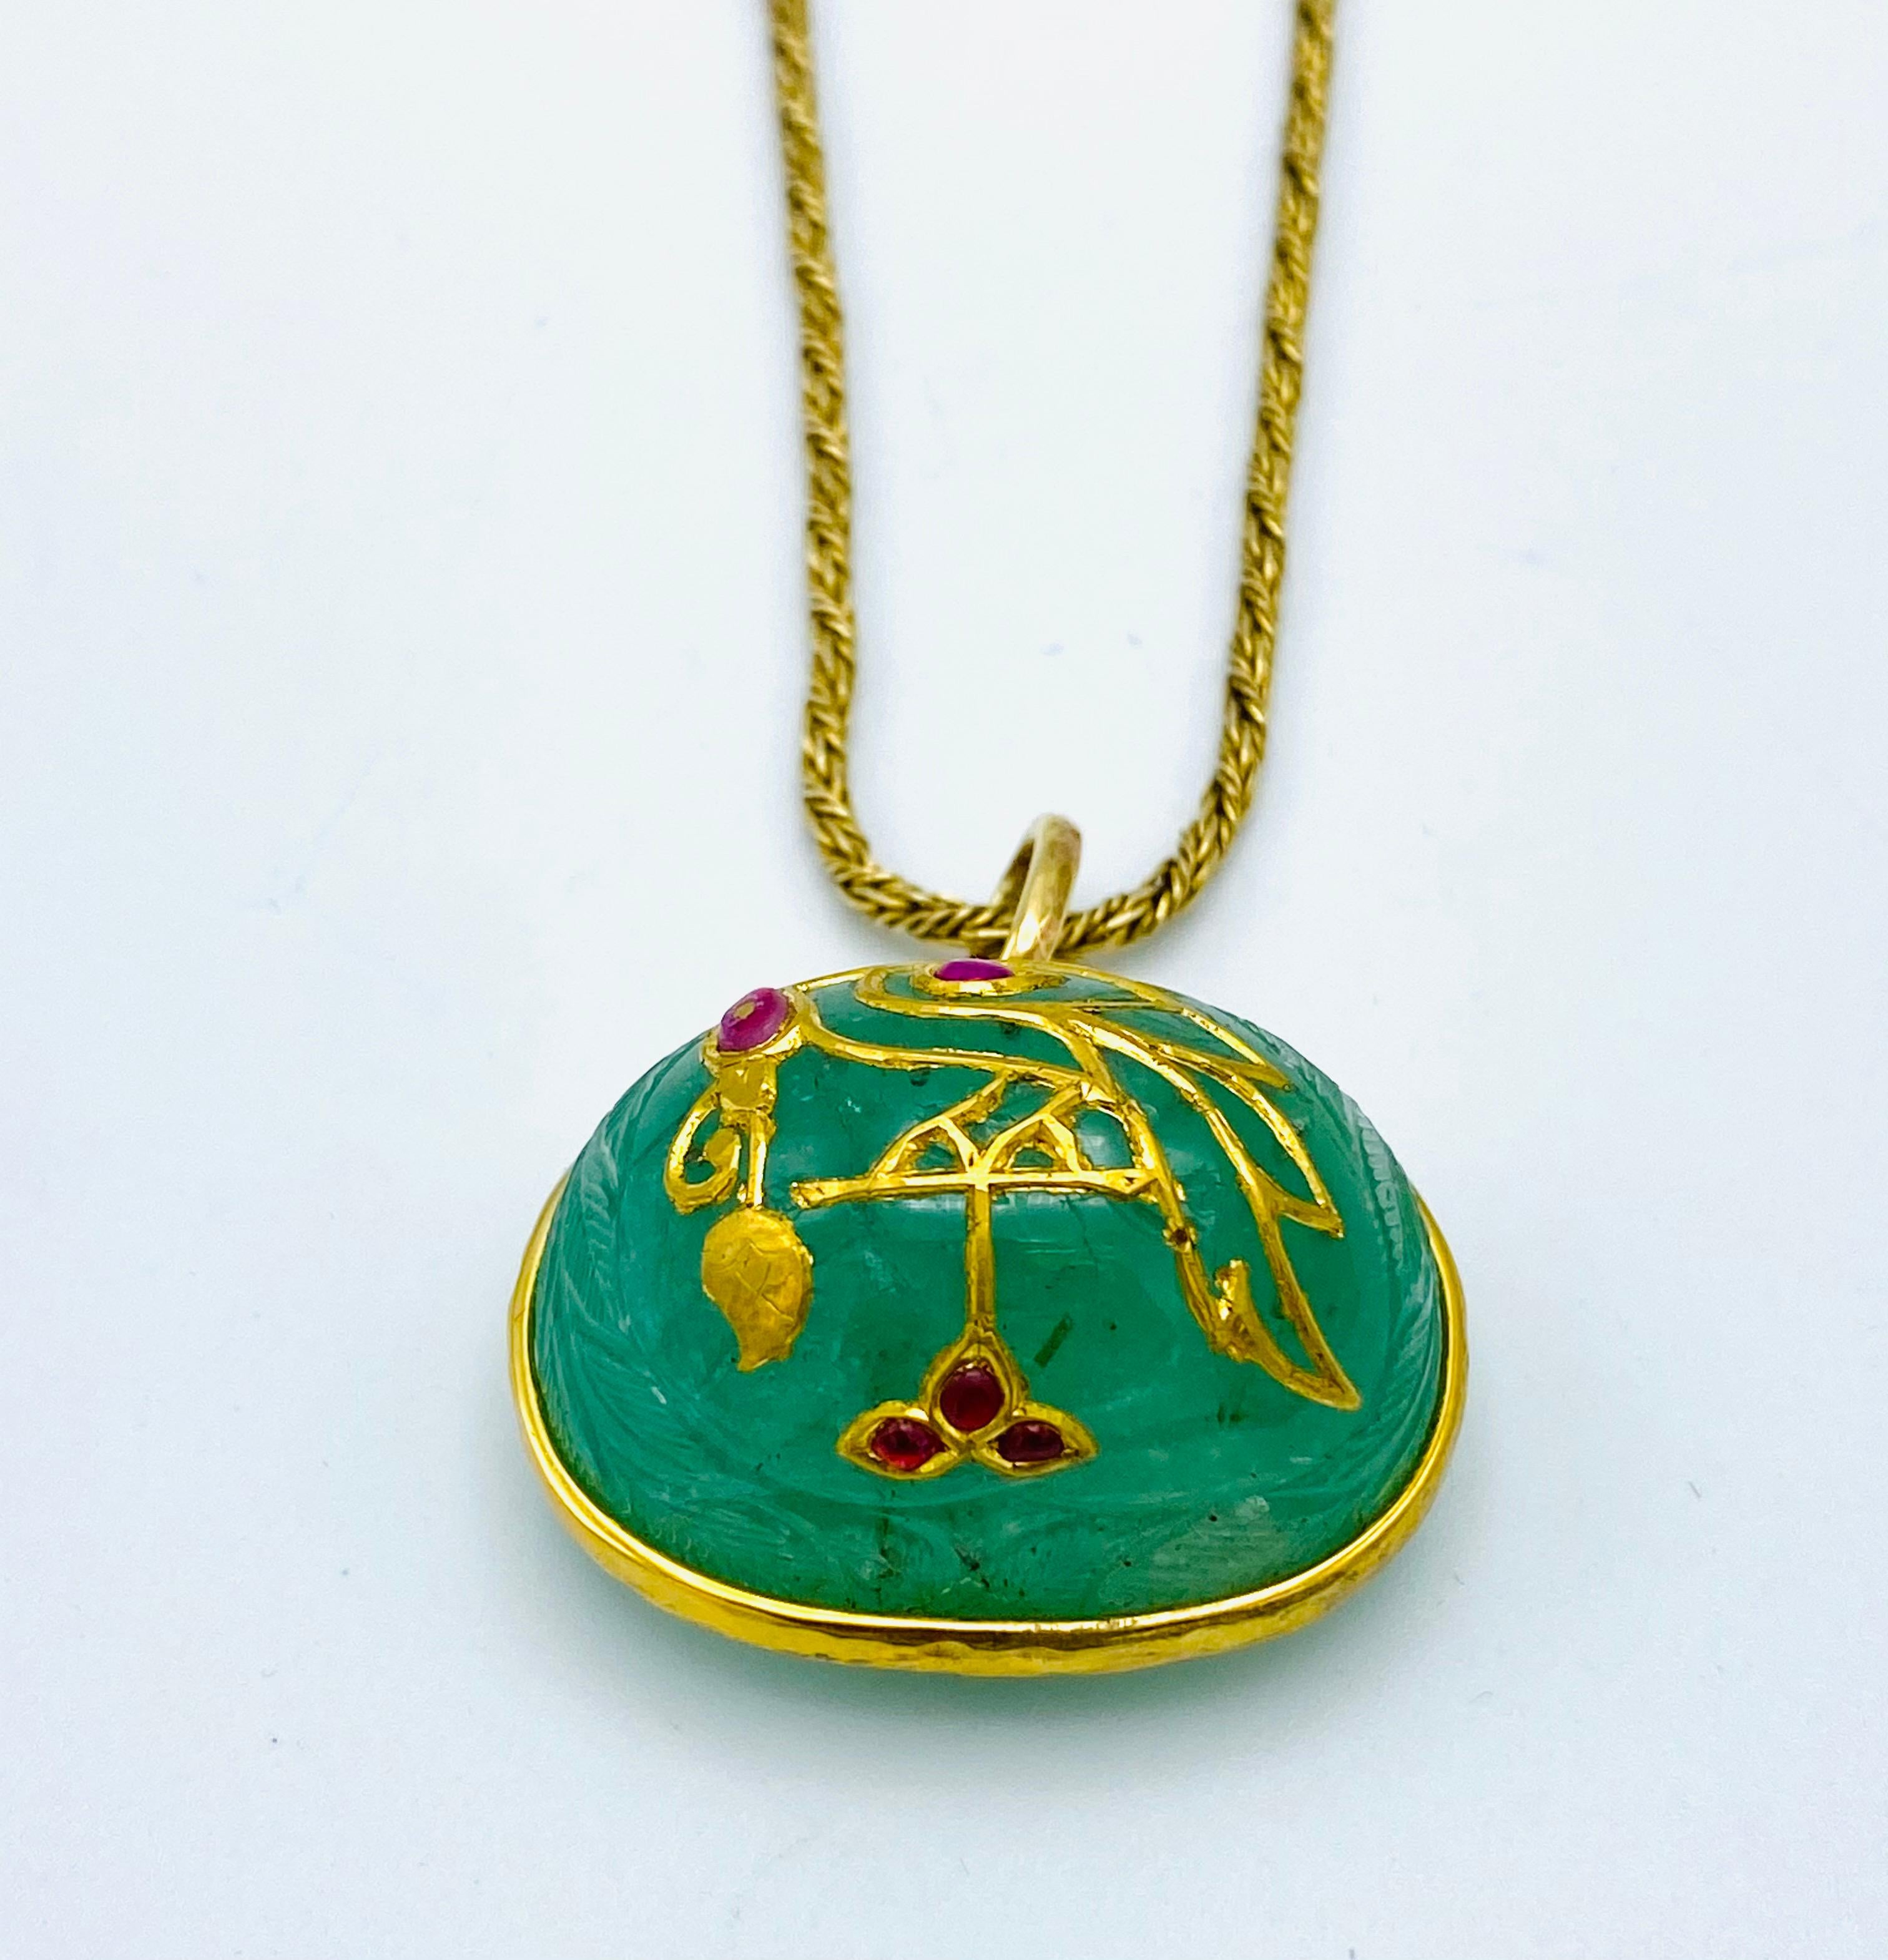 Product details:
Featuring 14K yellow gold, floral motif carved emerald with ruby detail and 10K yellow gold Victorian twisted rope chain necklace.
The pendant measure 1-5/8” W x 1” L x 3/4” H. 30.3 grams.
The chain measure 22- ½” long and 3mm wide.